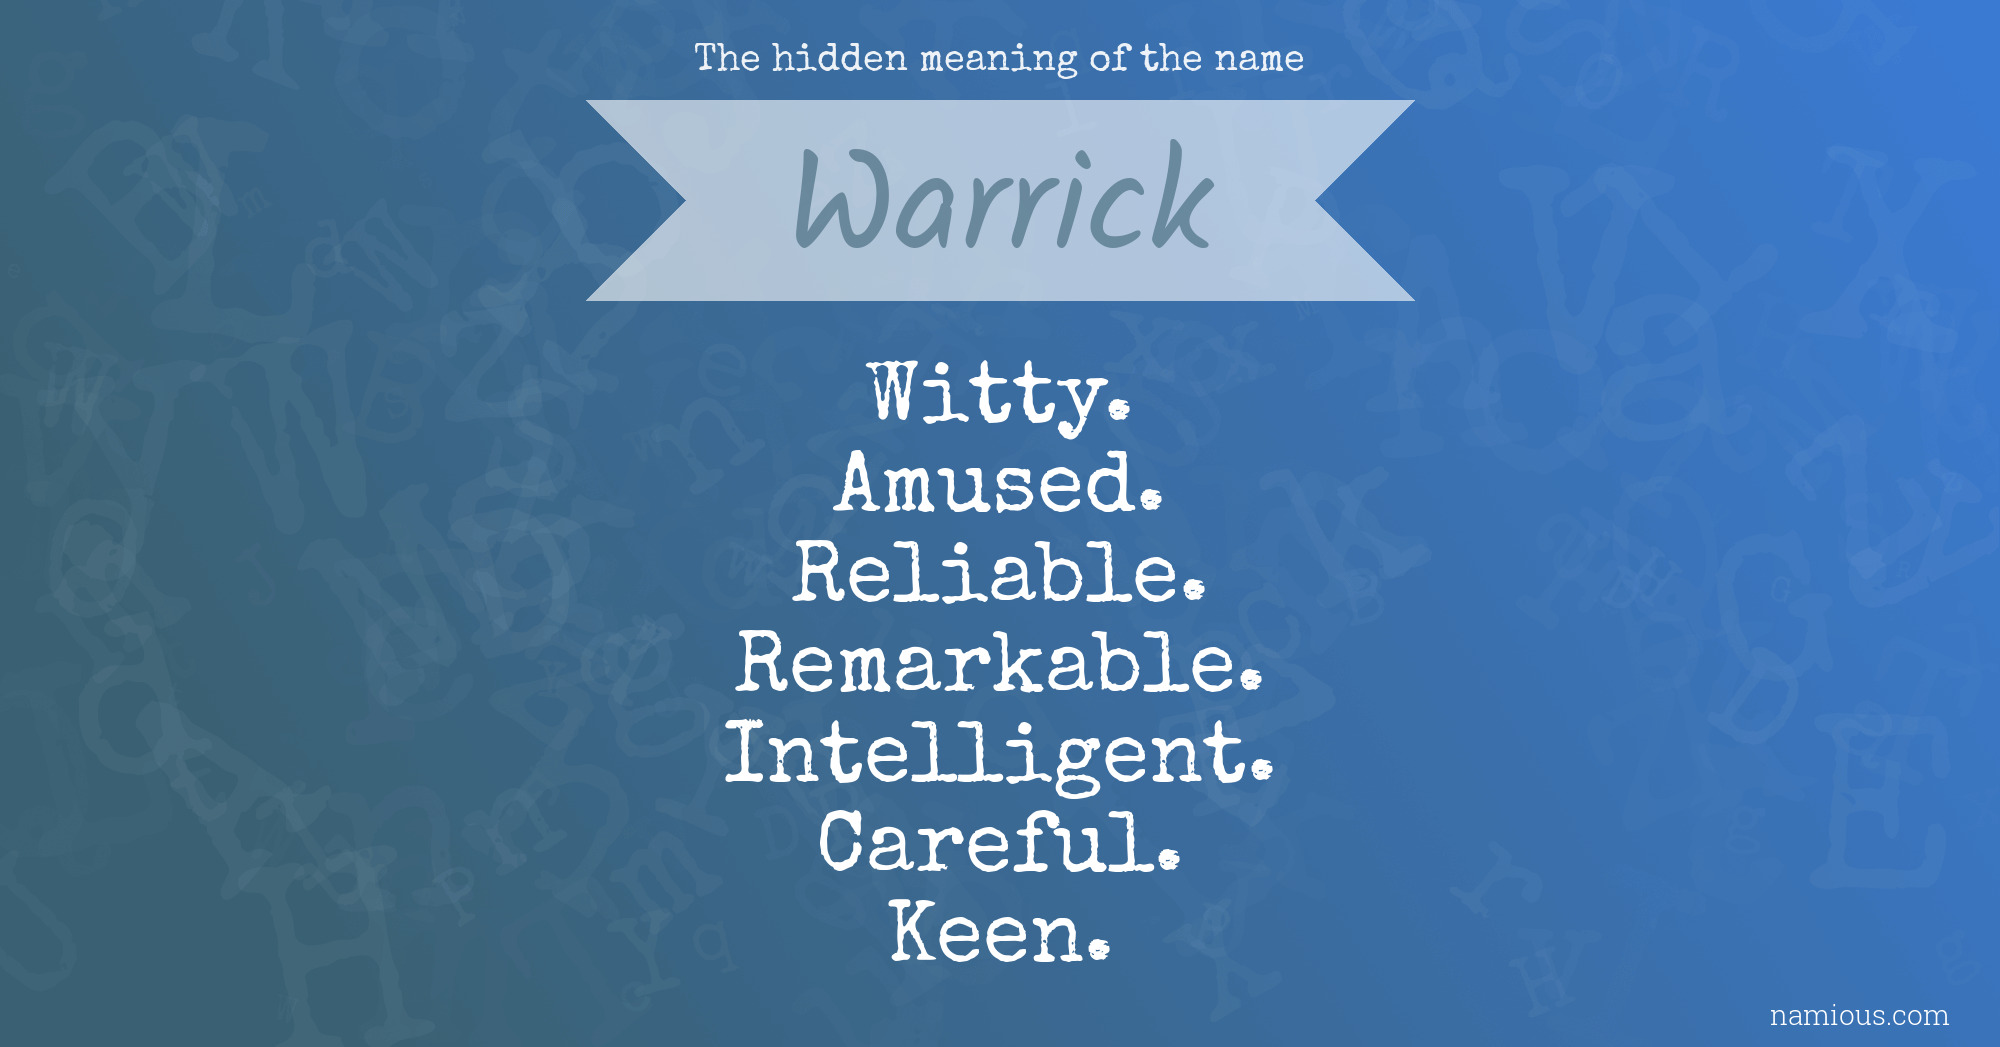 The hidden meaning of the name Warrick